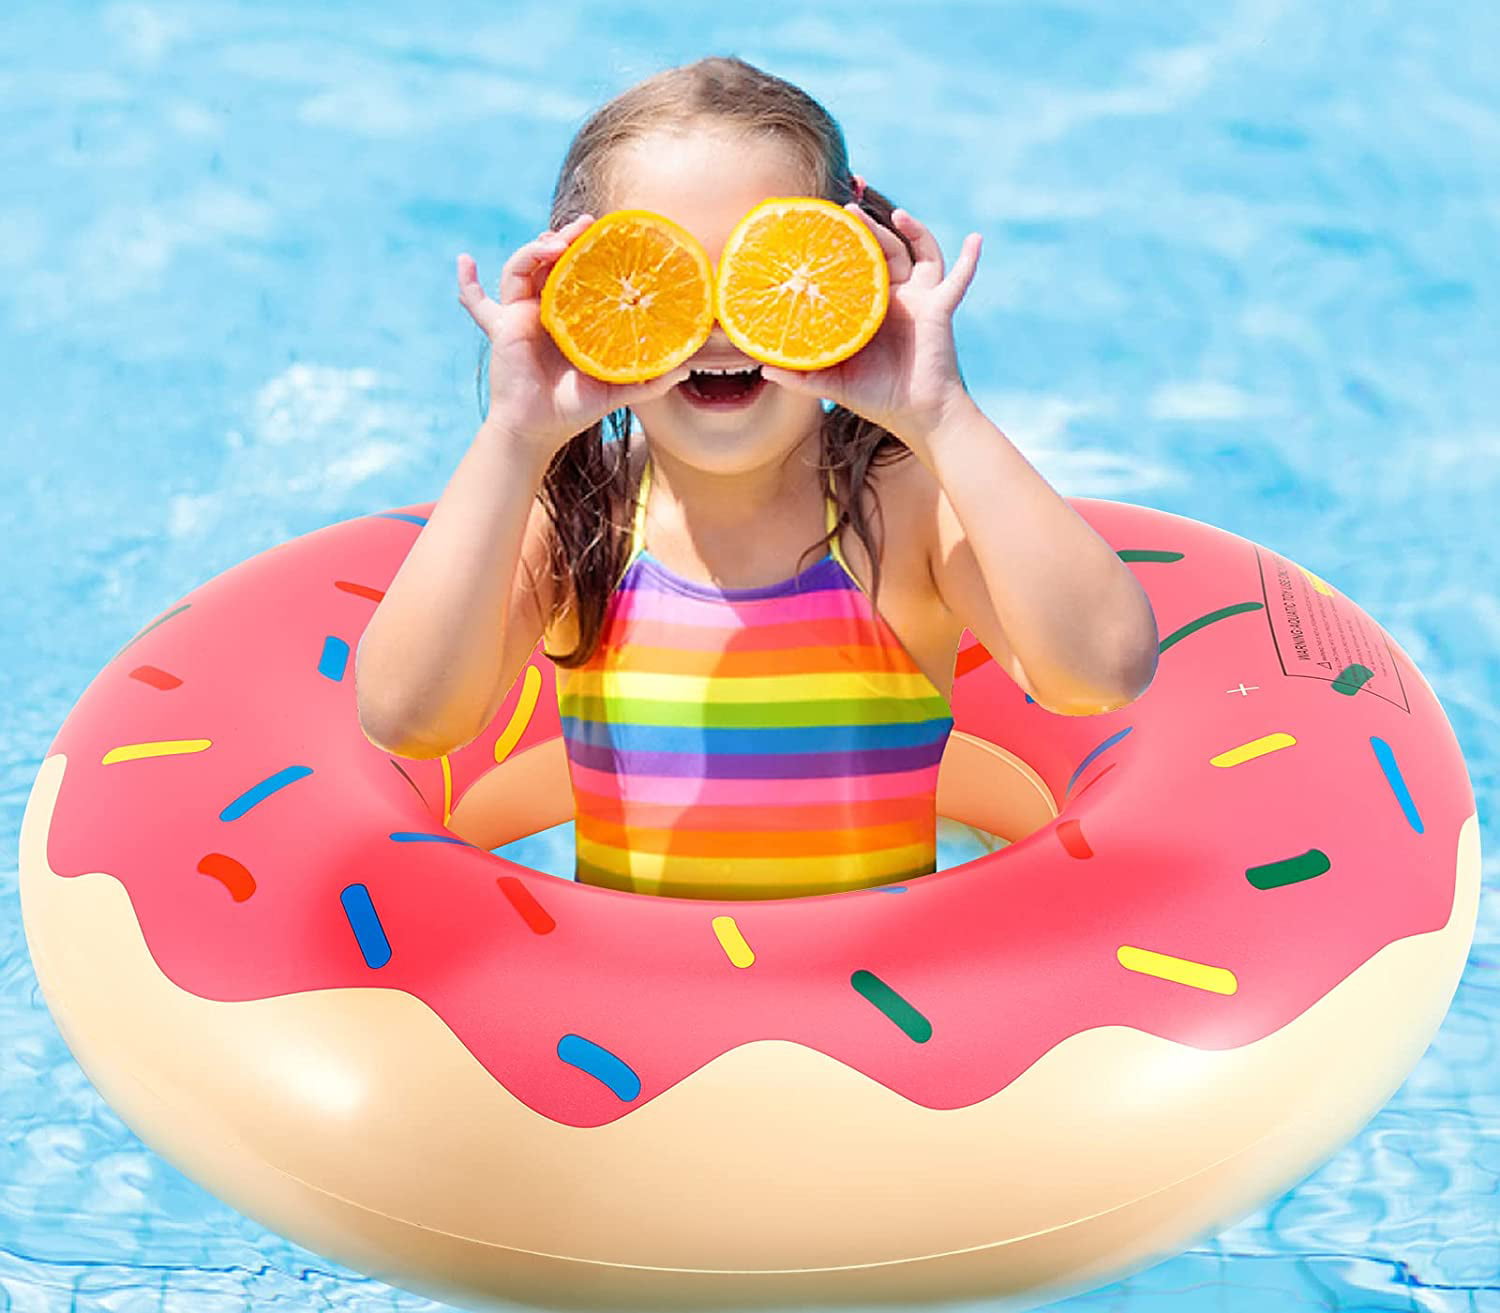 XL Inflatable Giant Swim Ring Swimming Pool Beach Adults Novelty Donut Float 35" 